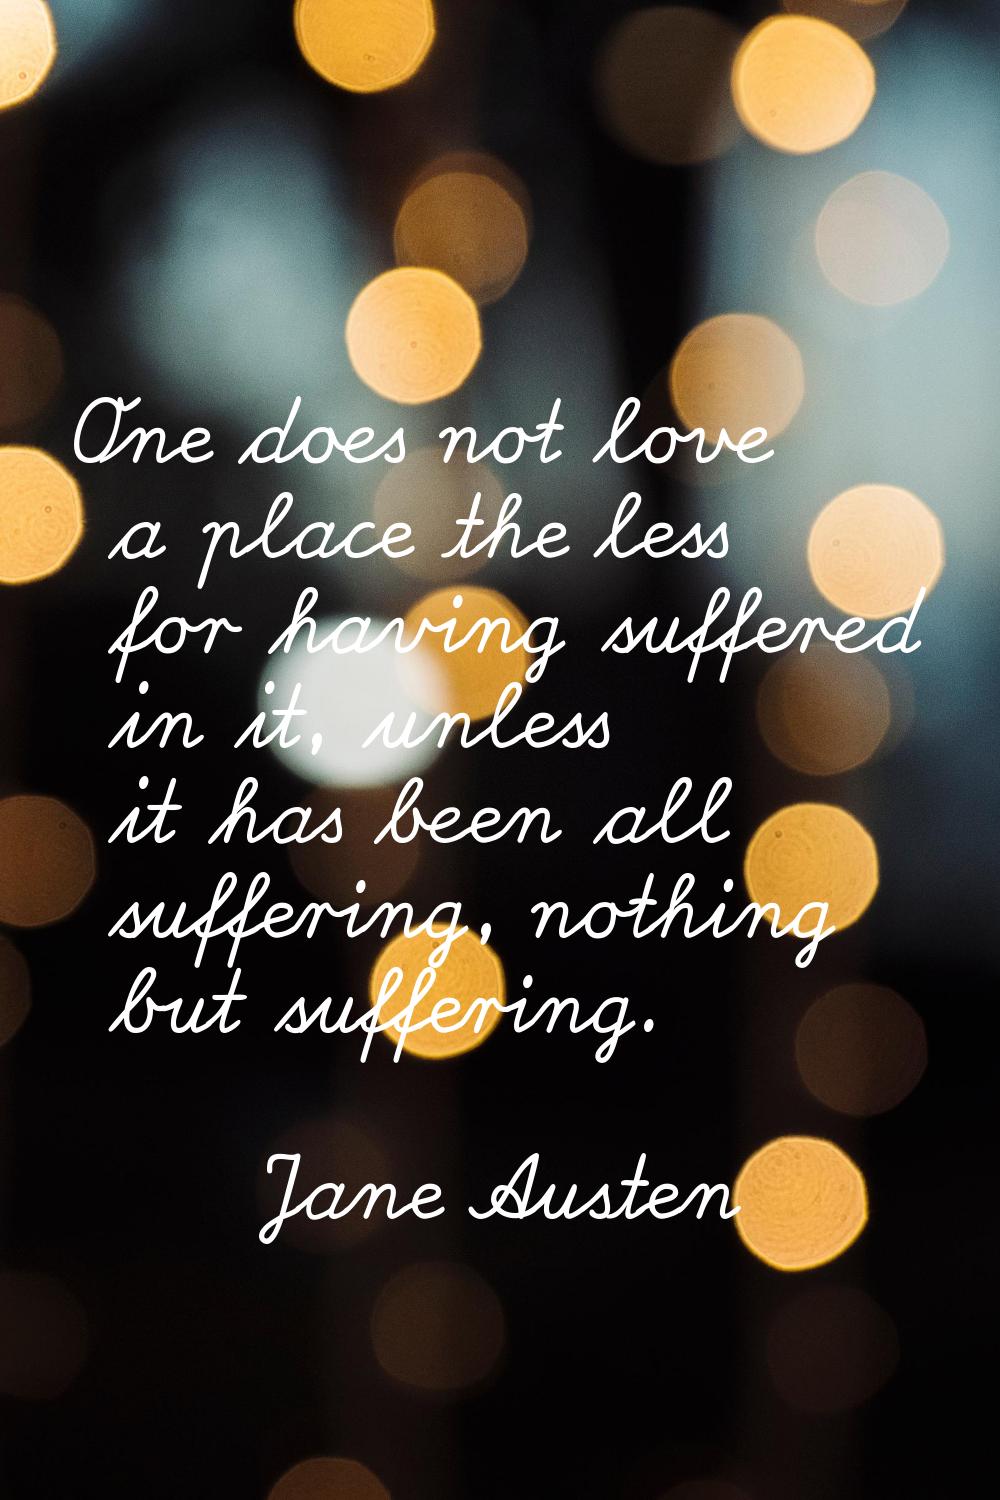 One does not love a place the less for having suffered in it, unless it has been all suffering, not